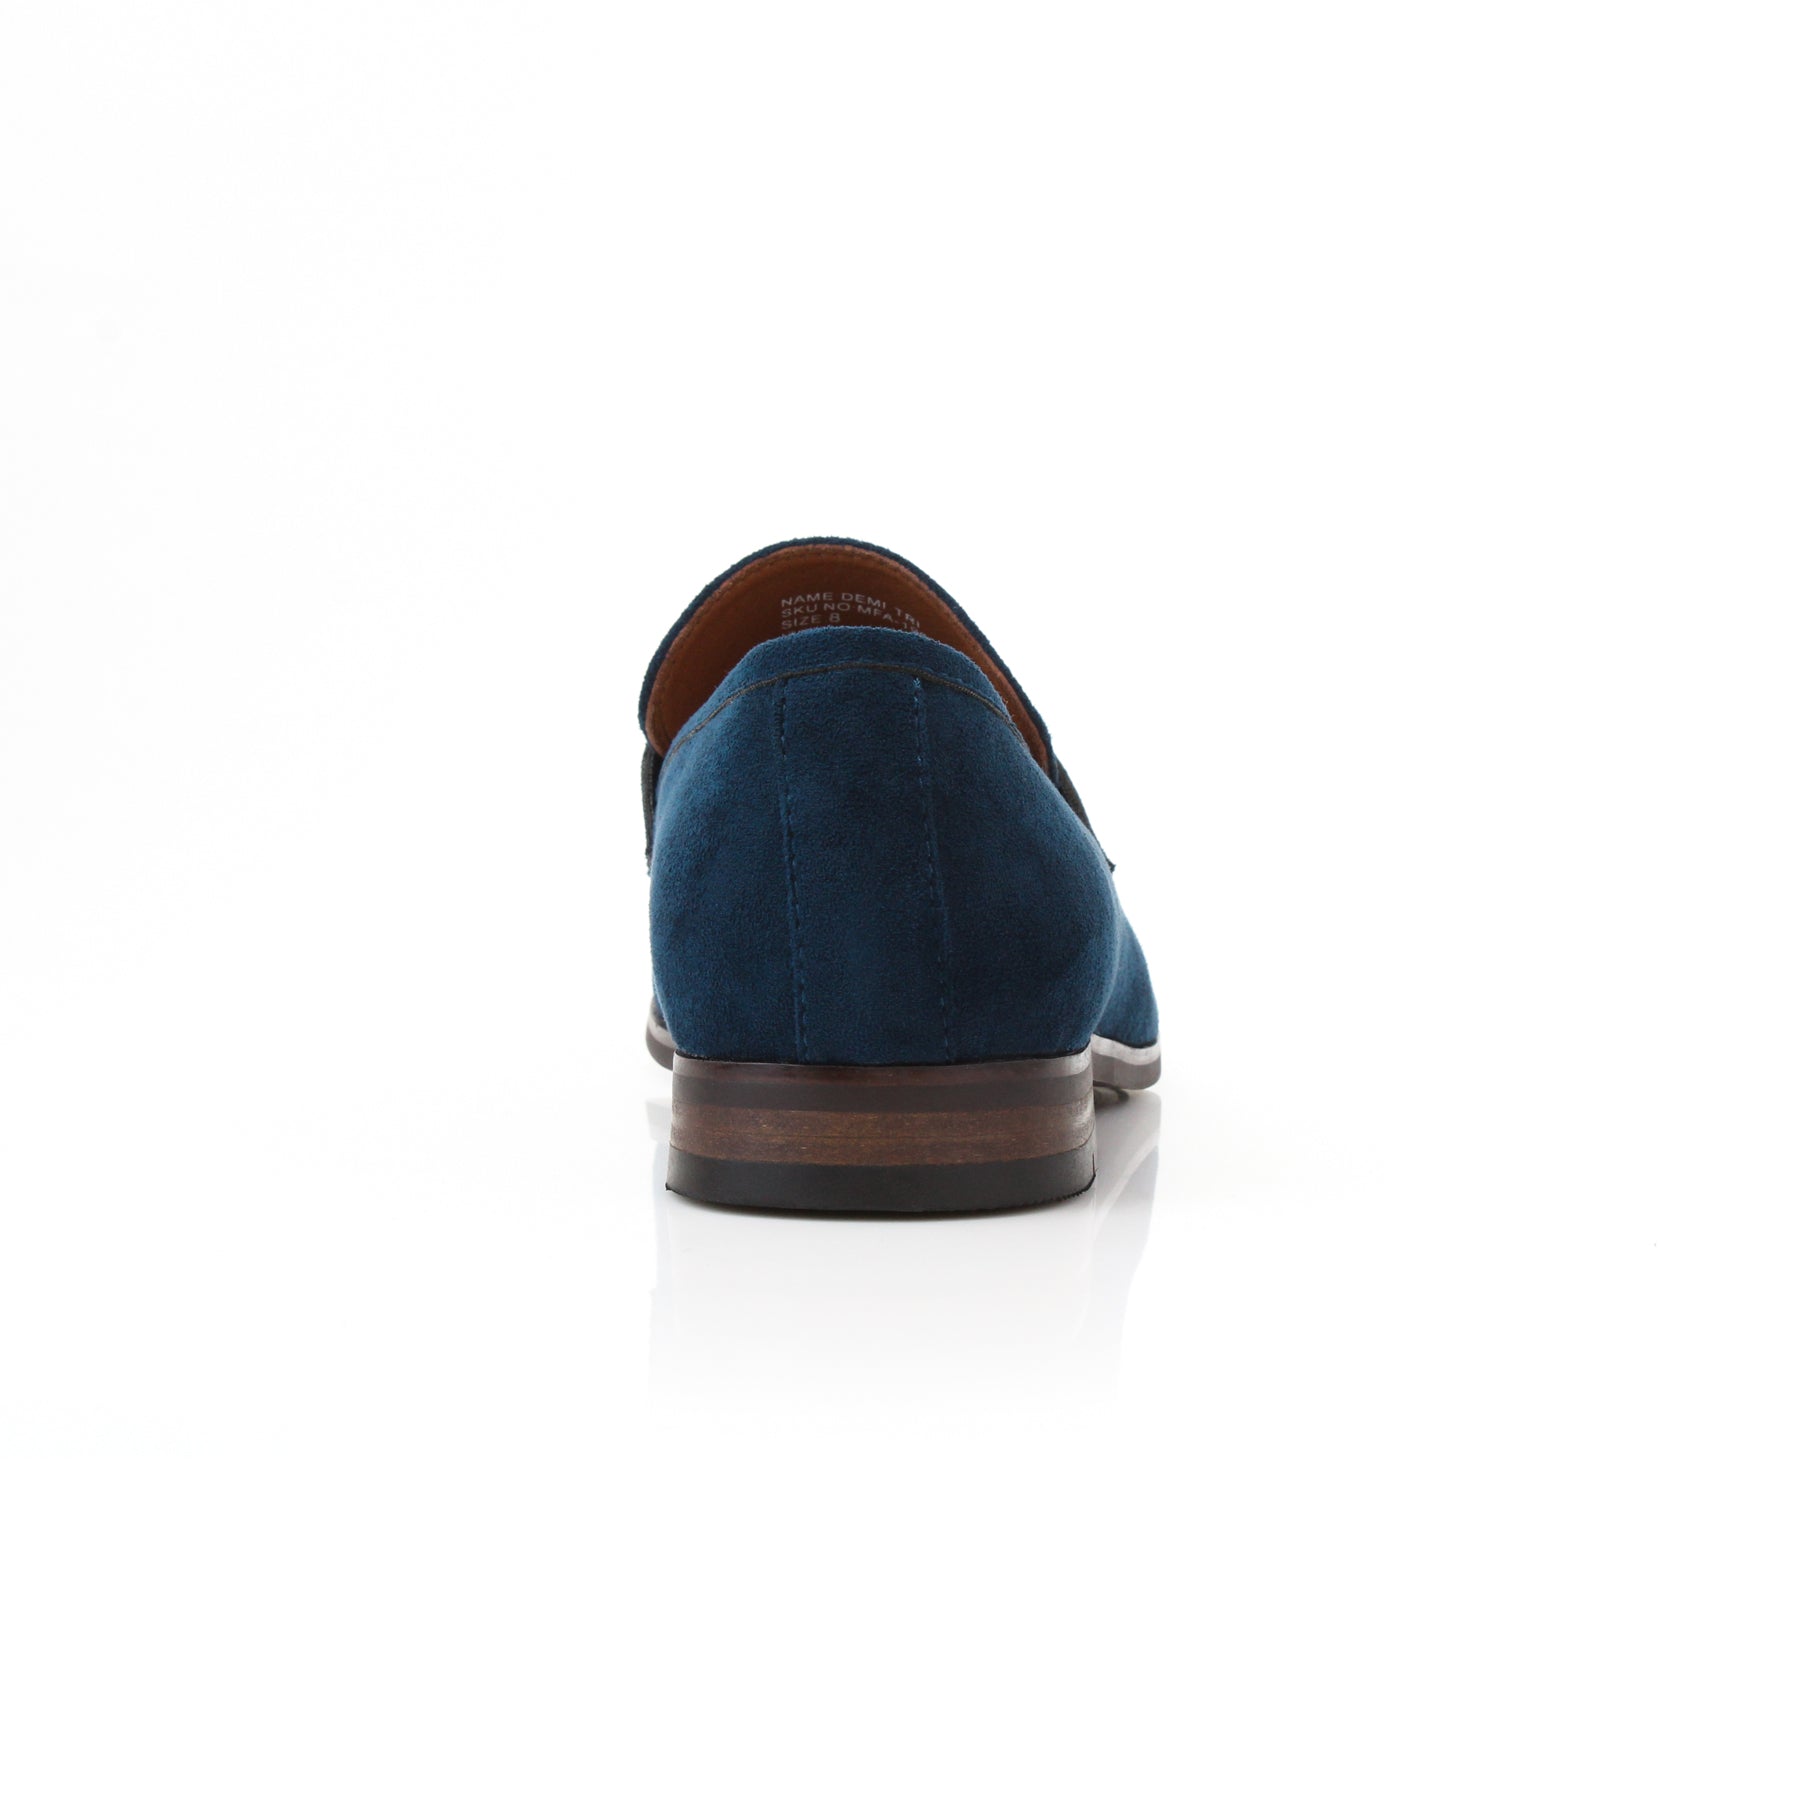 Metal Buckle Suede Loafers | Demitri by Ferro Aldo | Conal Footwear | Back Angle View